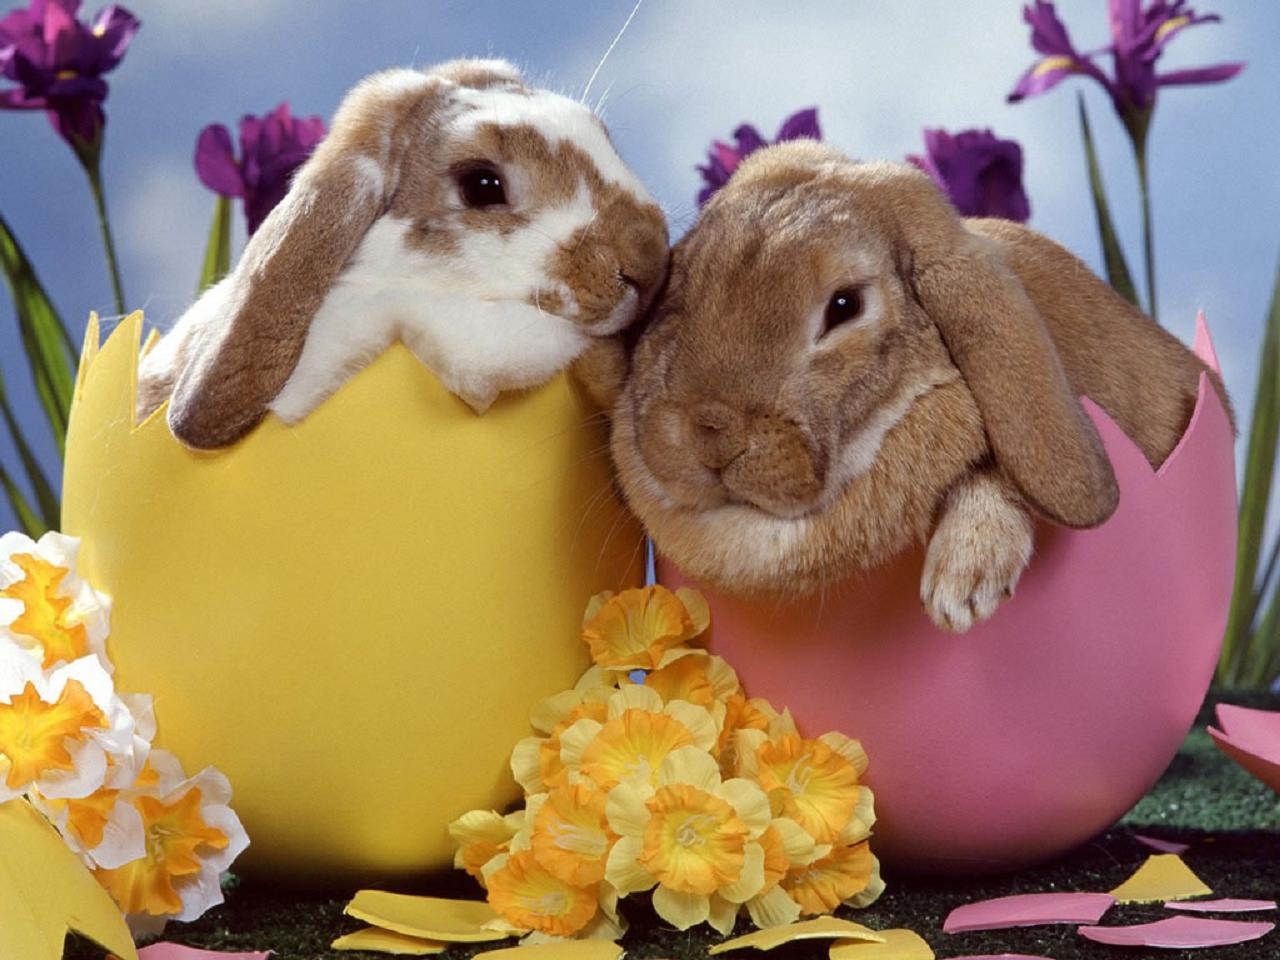 Easter Bunny Backgrounds Images amp Pictures   Becuo